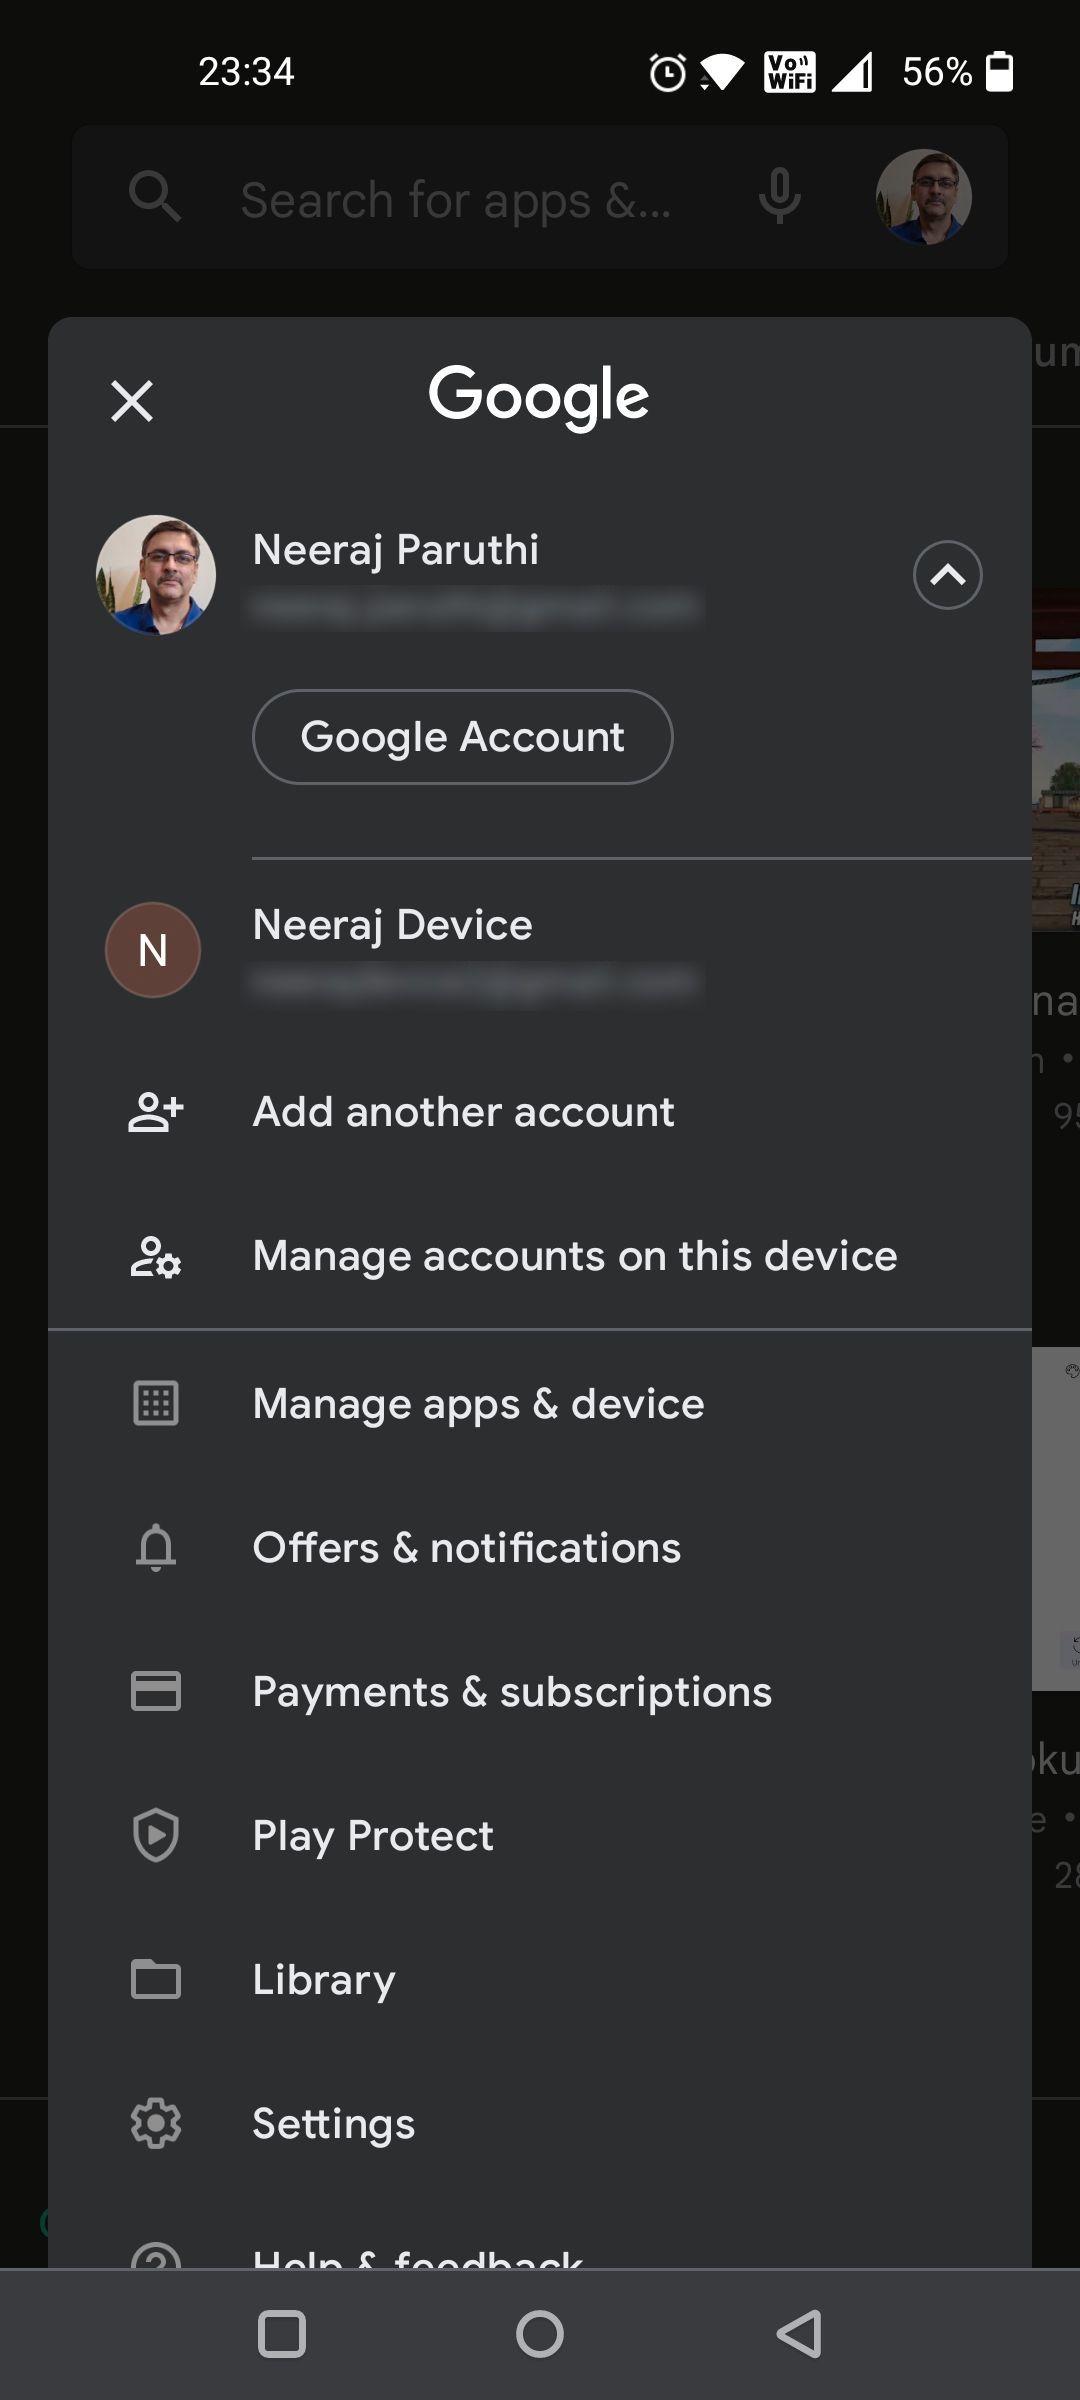 Tap on Down Arrow to View Both Devices or Accounts